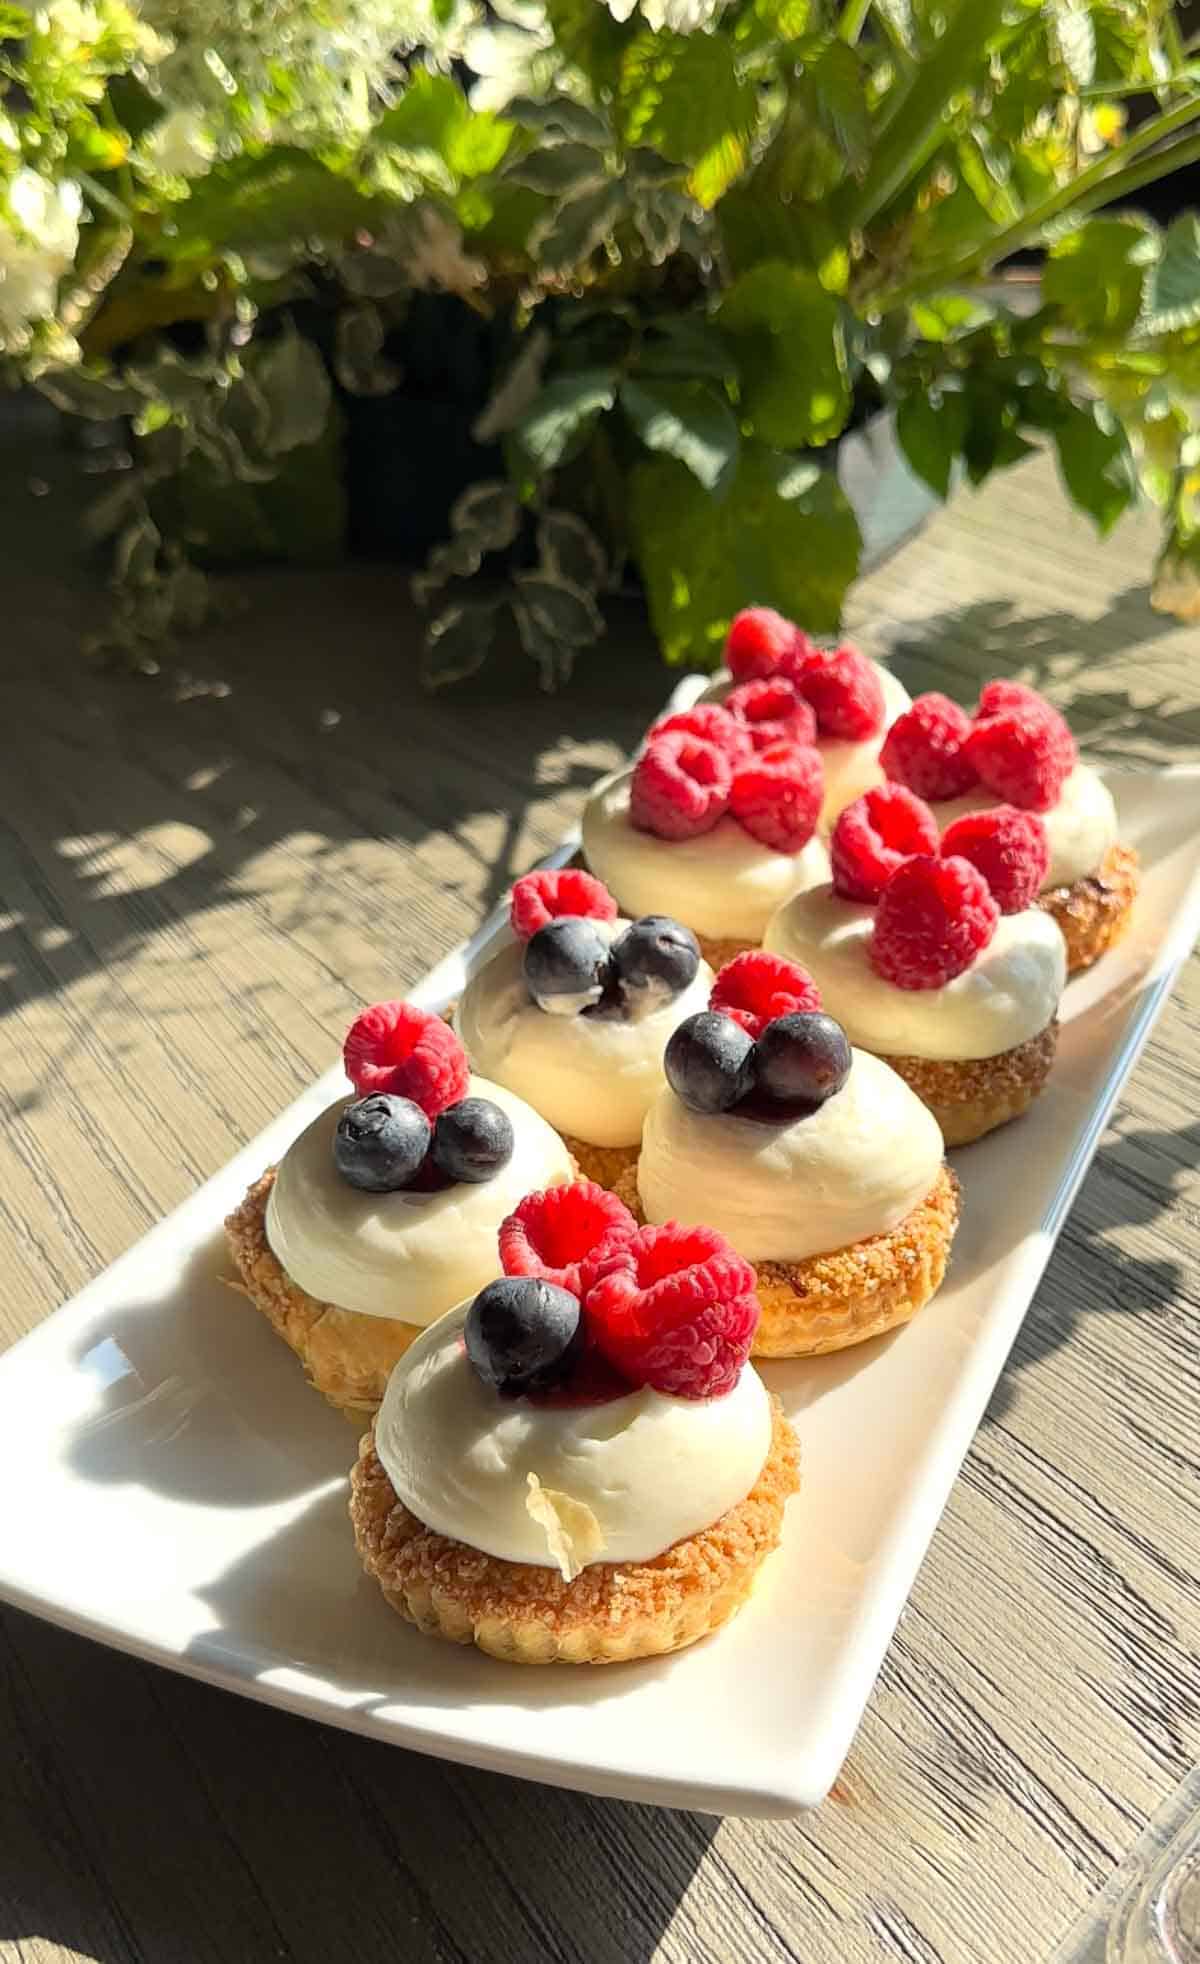 Raspberry Tarts on a plate with leafy green plant in the background.